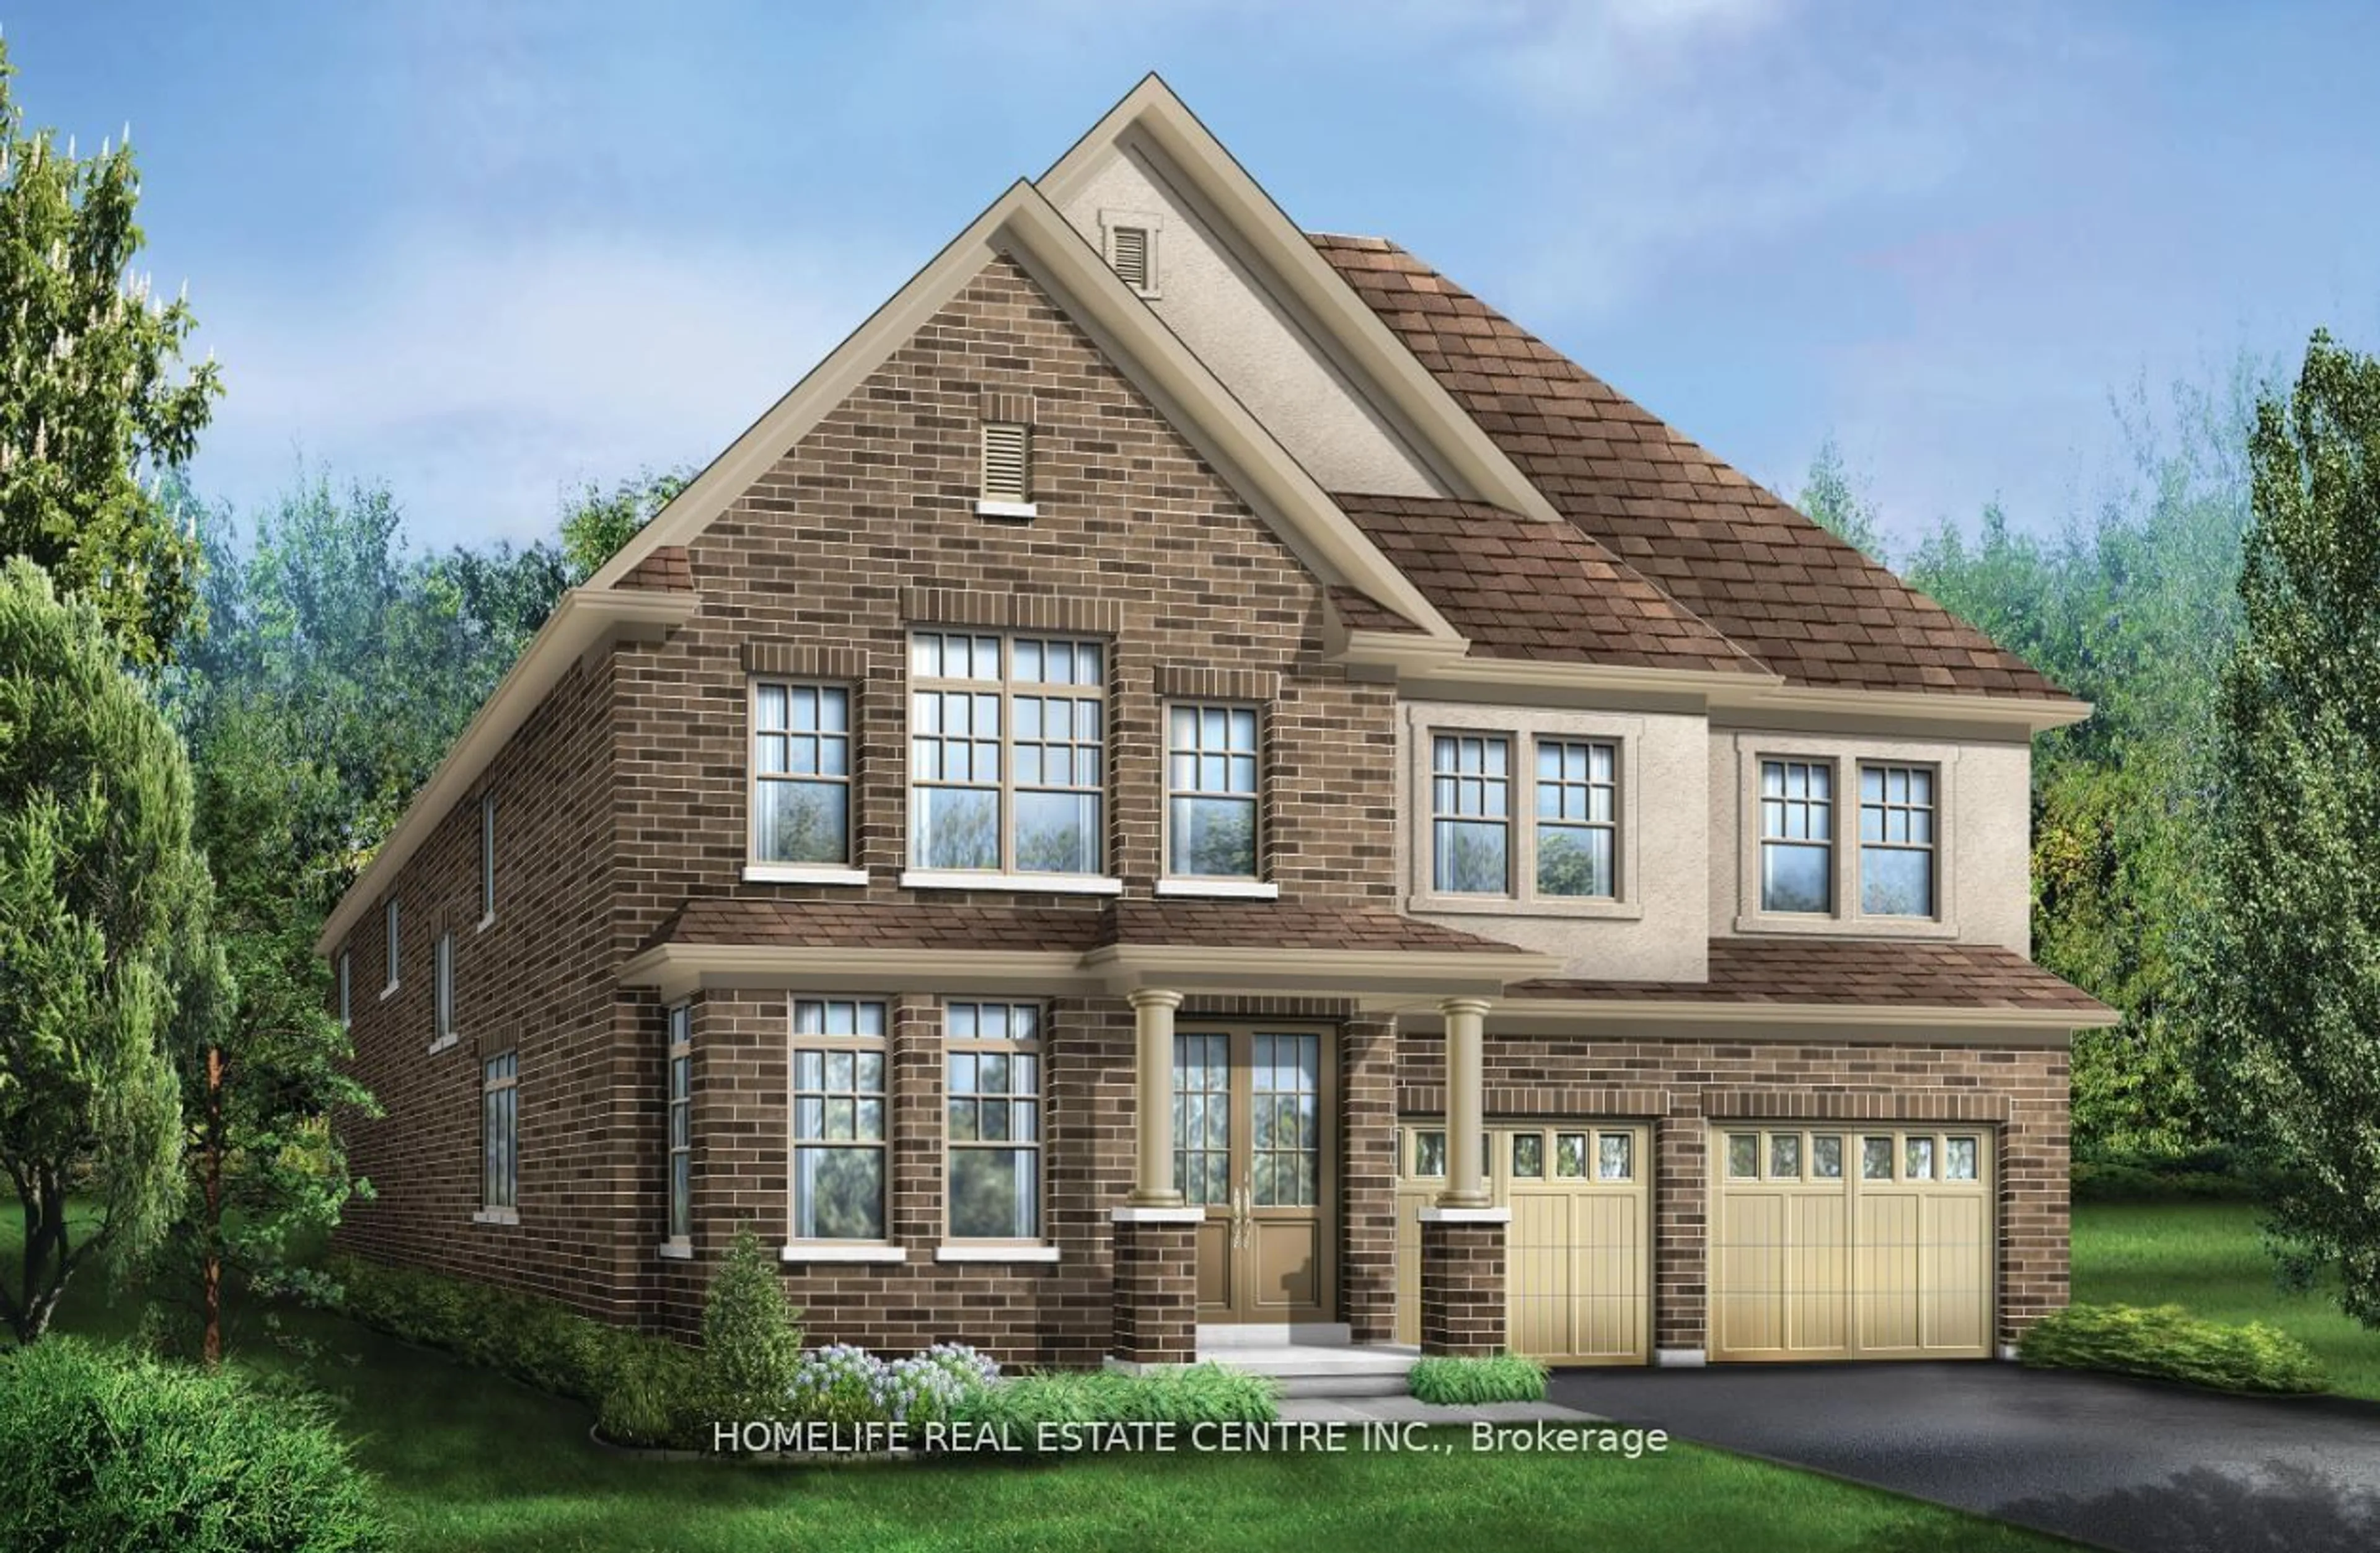 Home with brick exterior material for 31 Claremont Dr, Brampton Ontario L6R 0B8